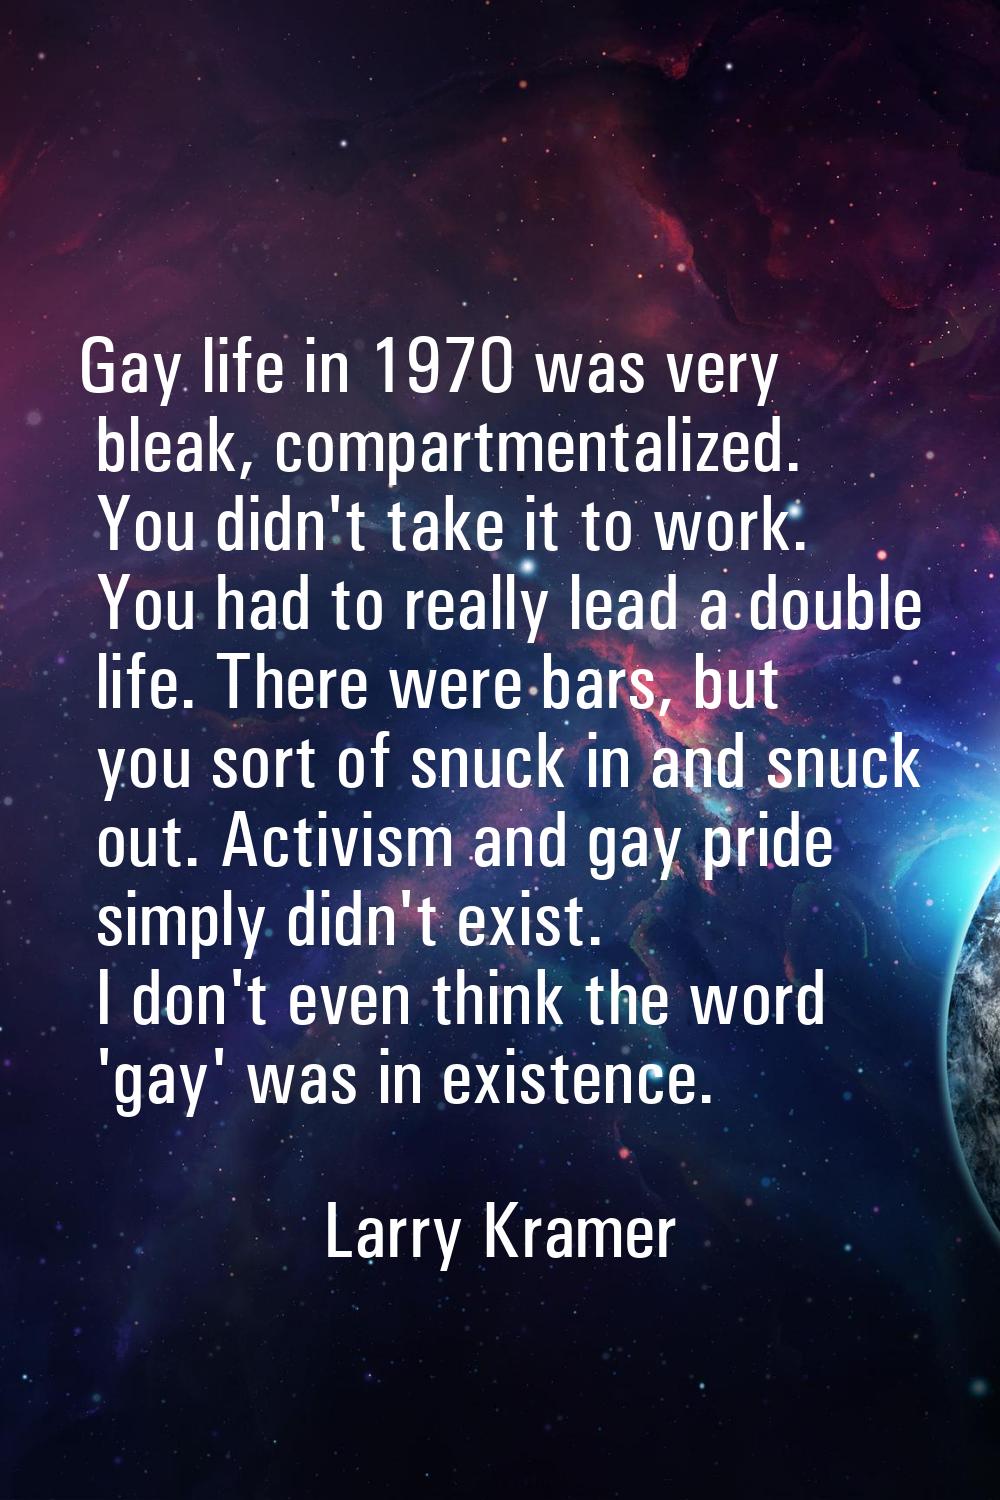 Gay life in 1970 was very bleak, compartmentalized. You didn't take it to work. You had to really l